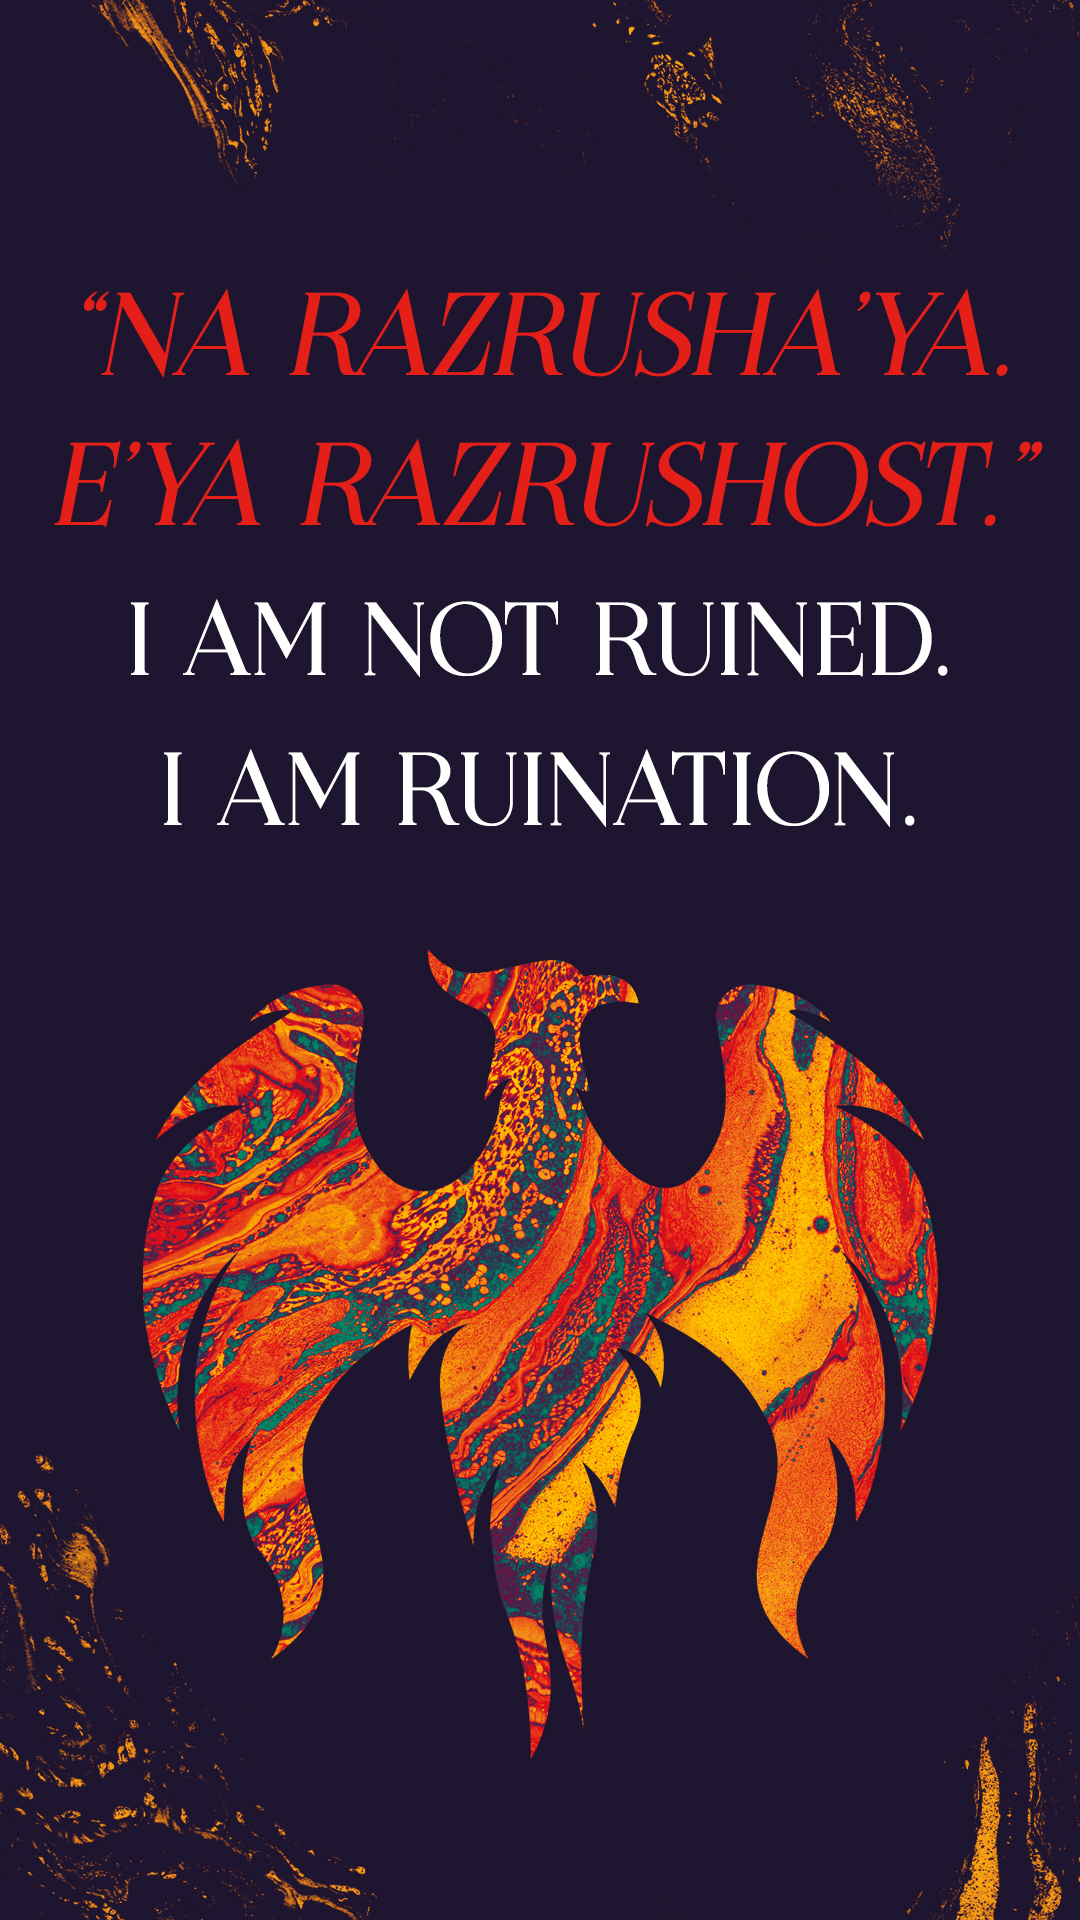 An artistic poster with a vibrant, fiery phoenix rising in bold colors against a dark background, accompanied by the text "na razrusha'ya. eya razrushost. i am not ruined. i am ruination." in both cyrillic and english.